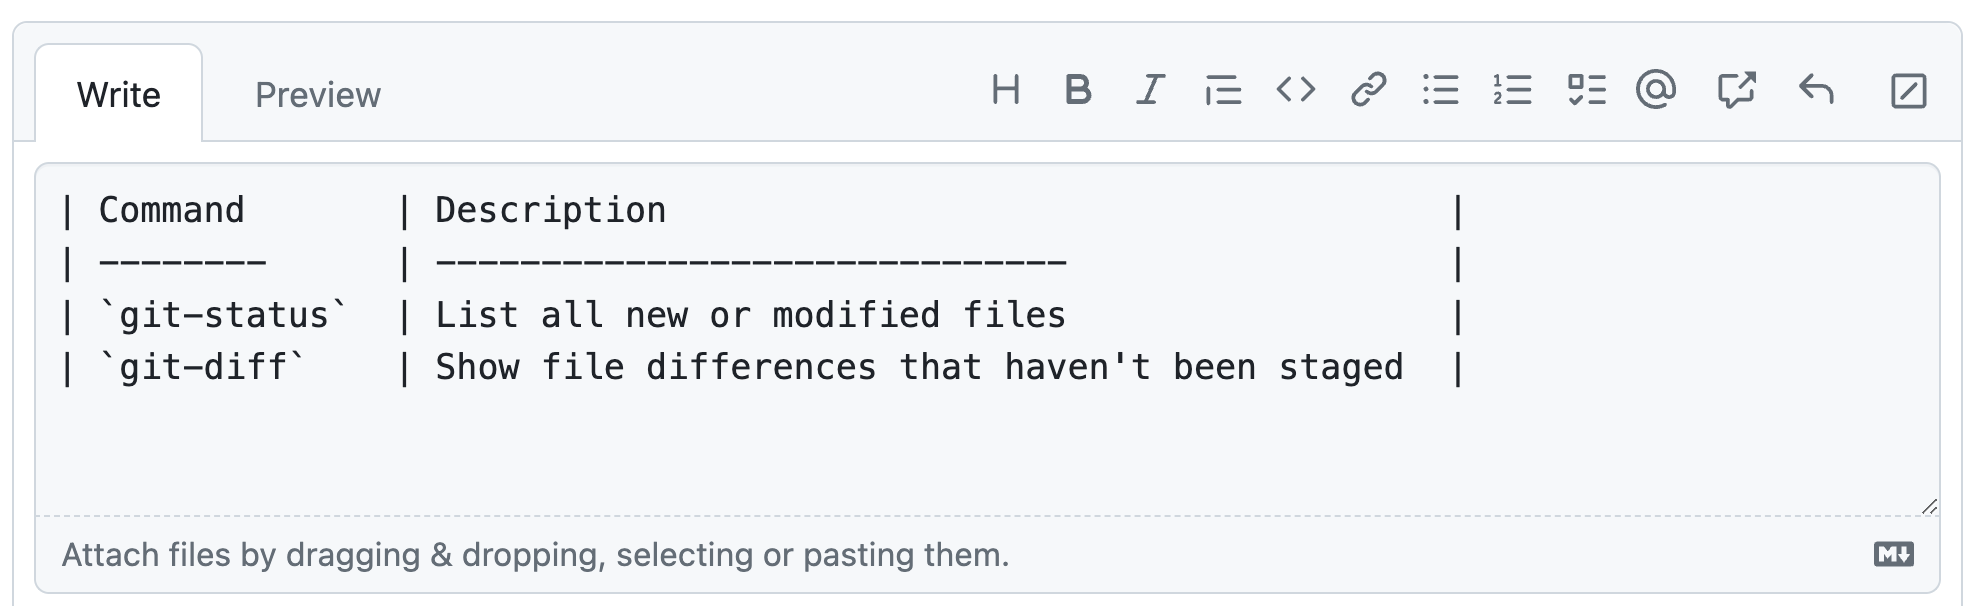 Screenshot showing the GitHub comment field with fixed-width fonts enabled